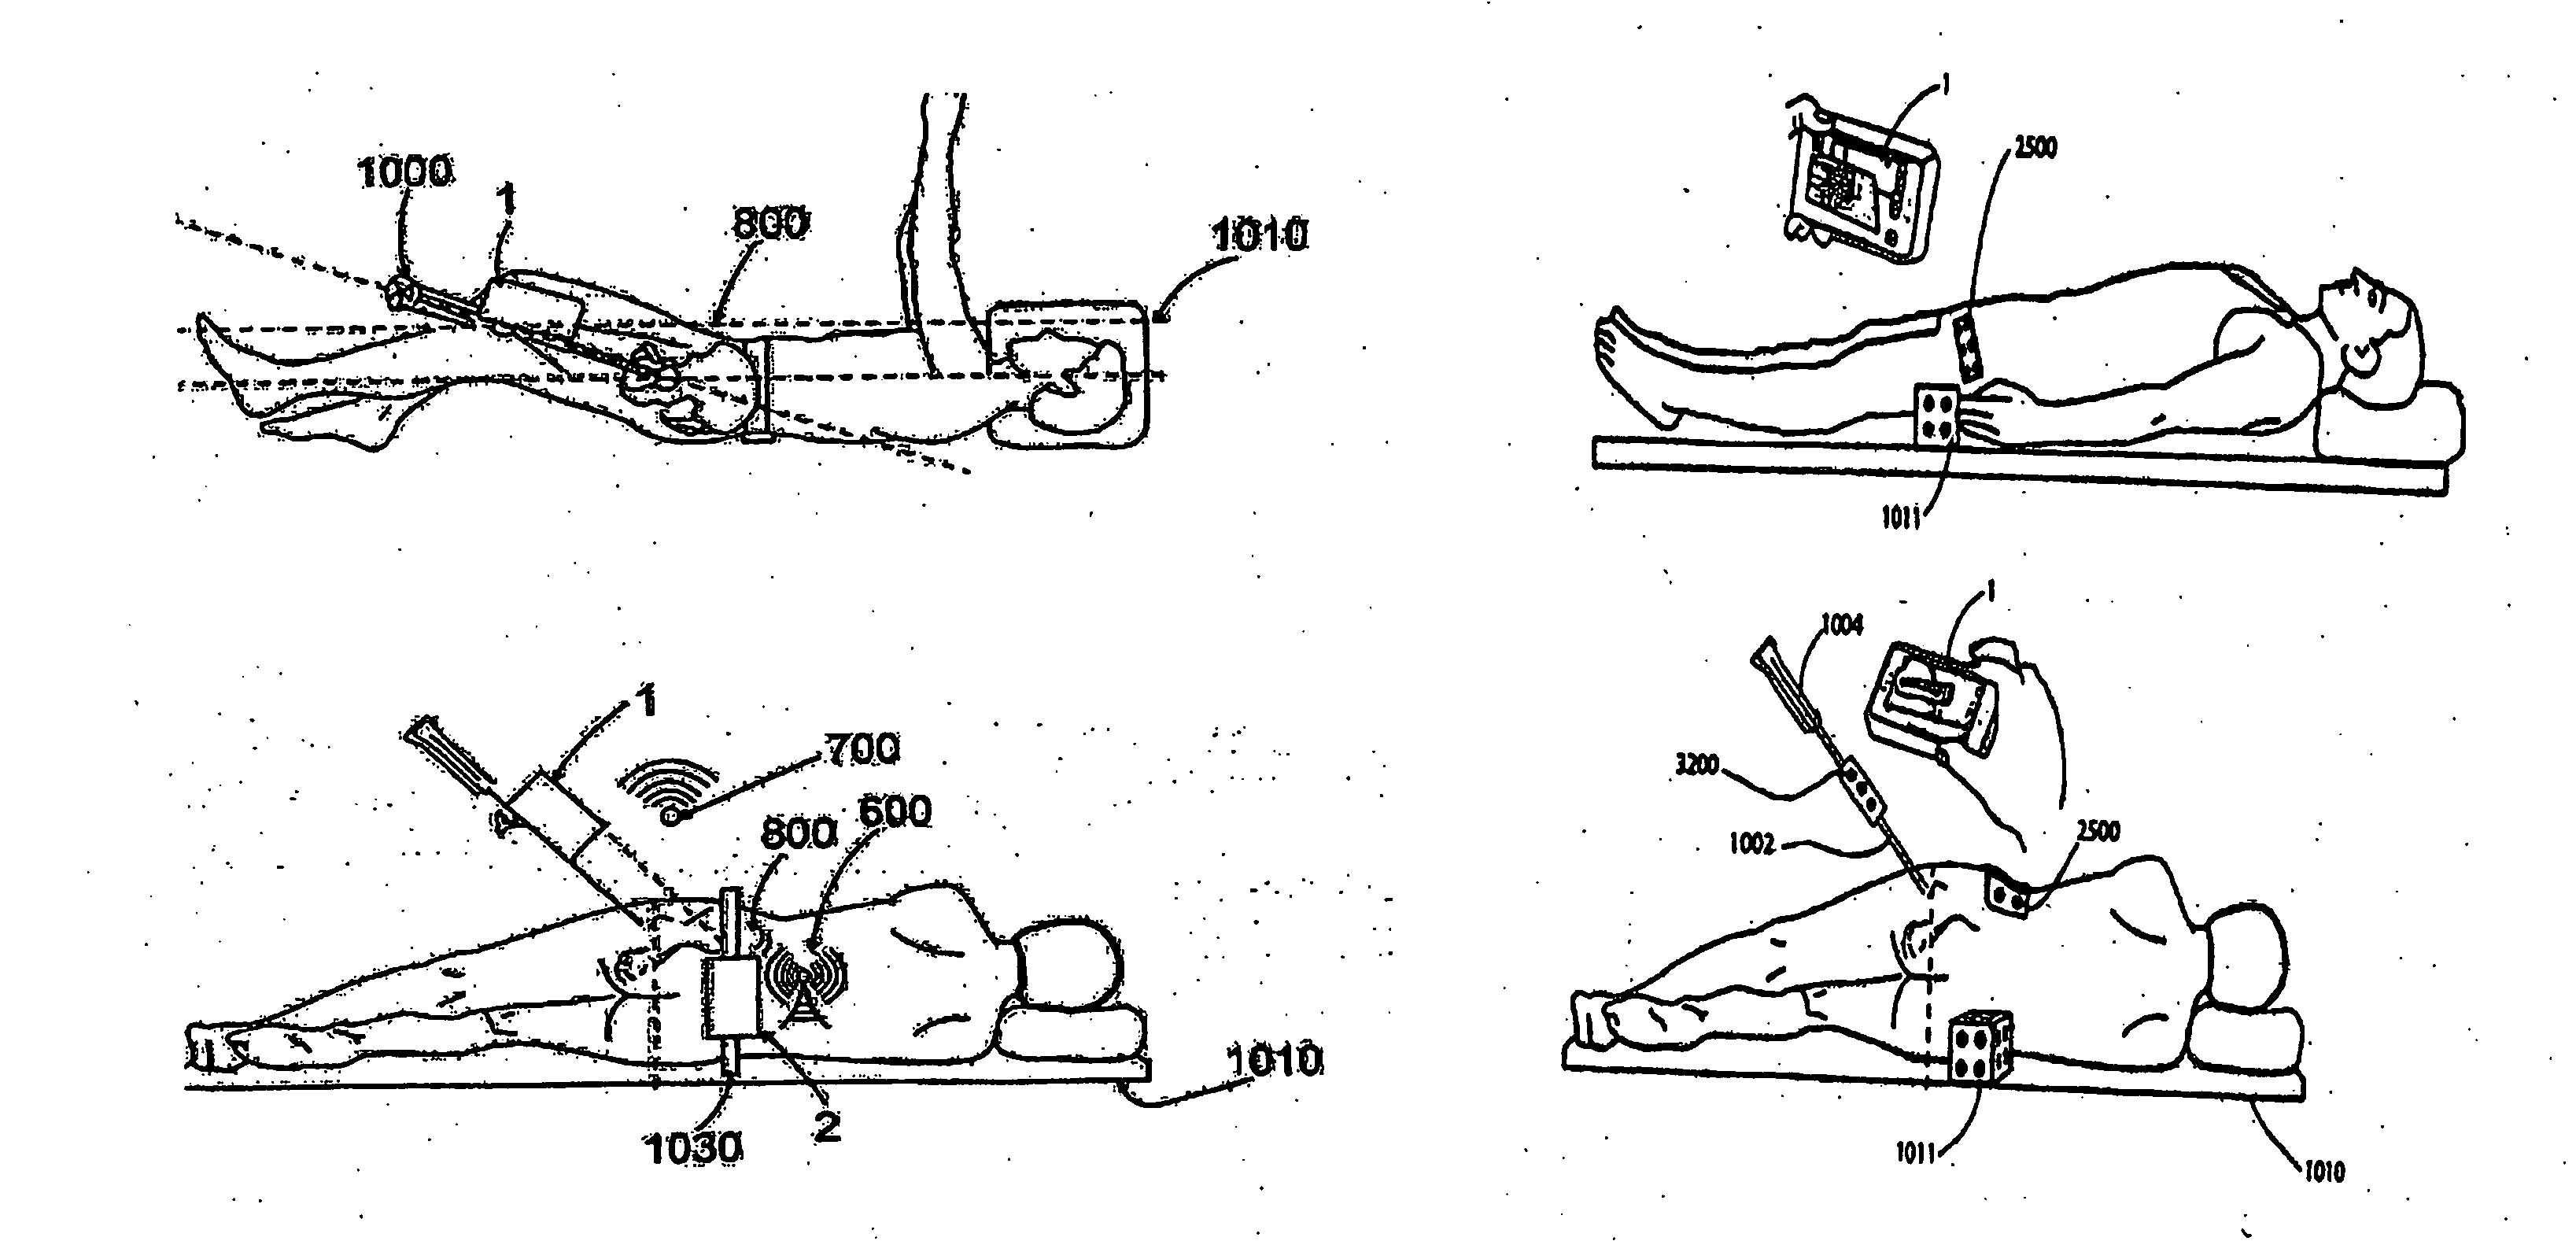 Handheld tracking system and devices for aligning implant systems during surgery